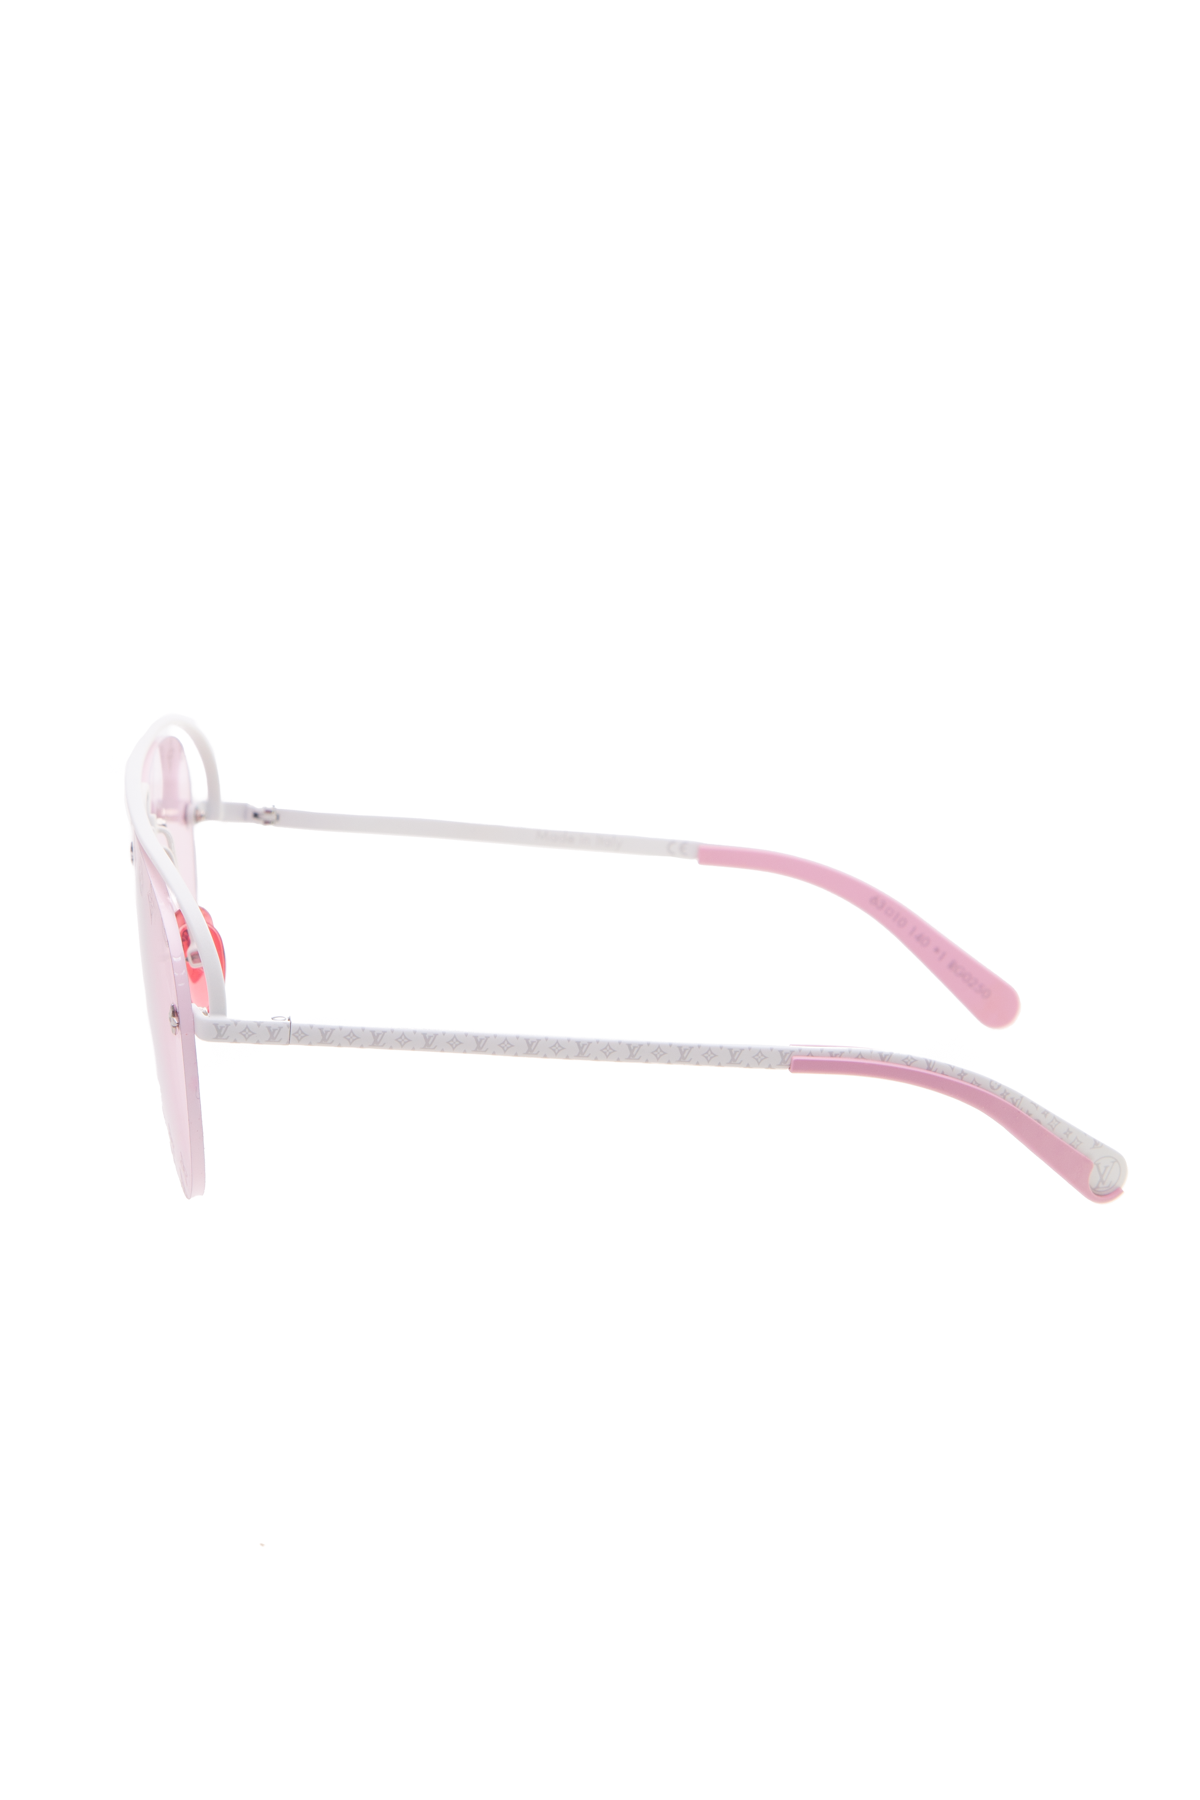 Louis Vuitton My LV Chain Two Square Sunglasses Pink Metal. Size U